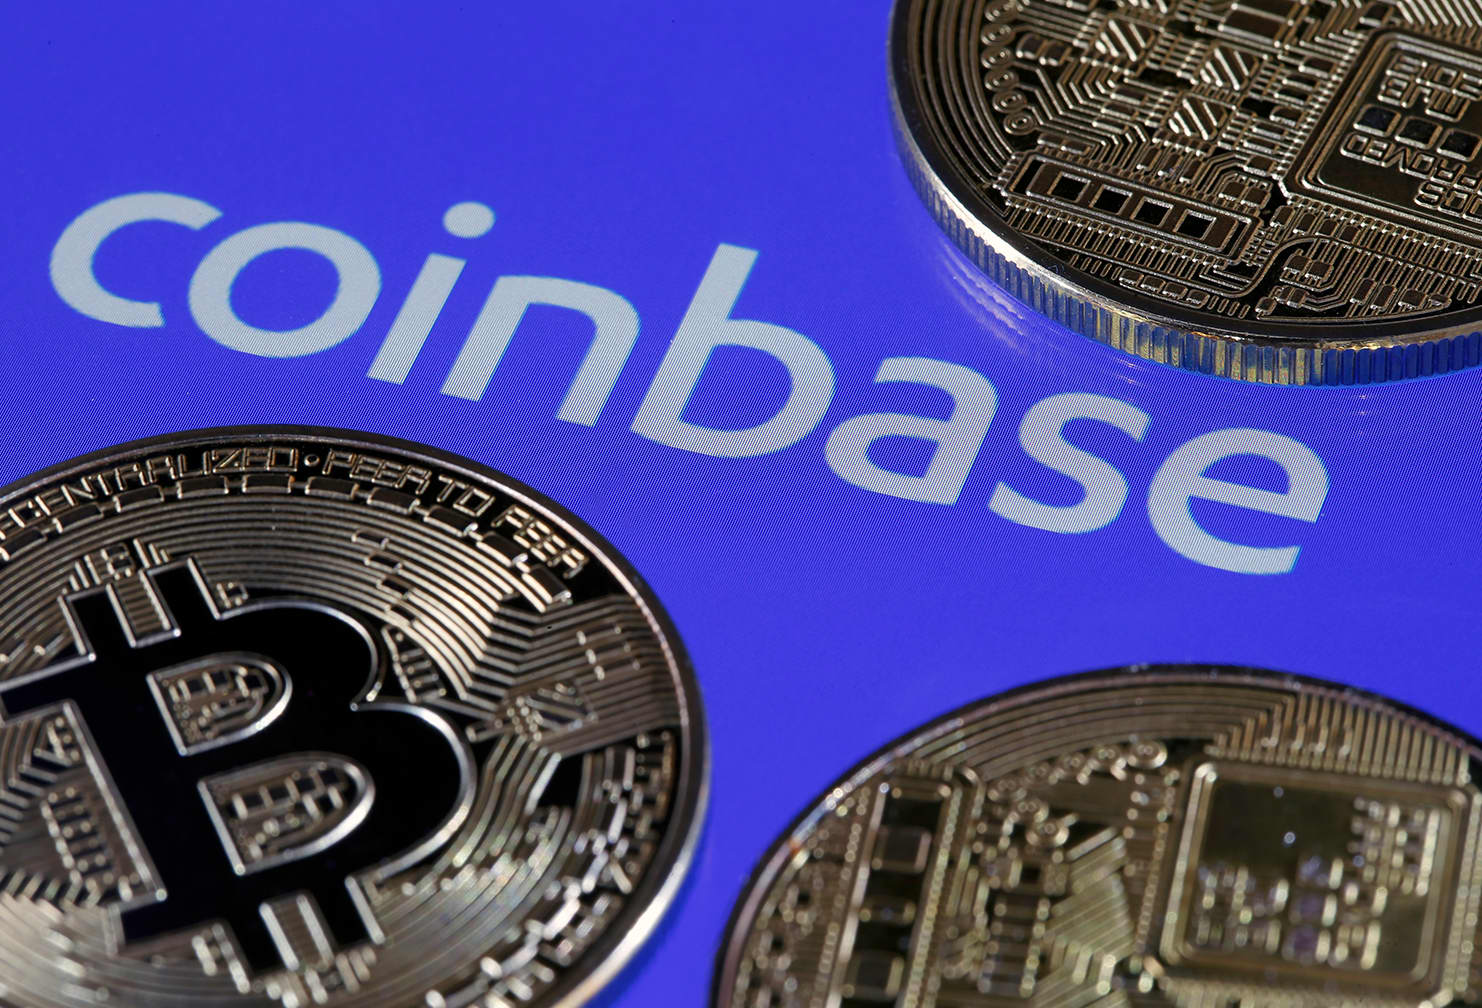 Coinbase could tumble more than 45% as prolonged SEC battle unfolds, TD Cowen says